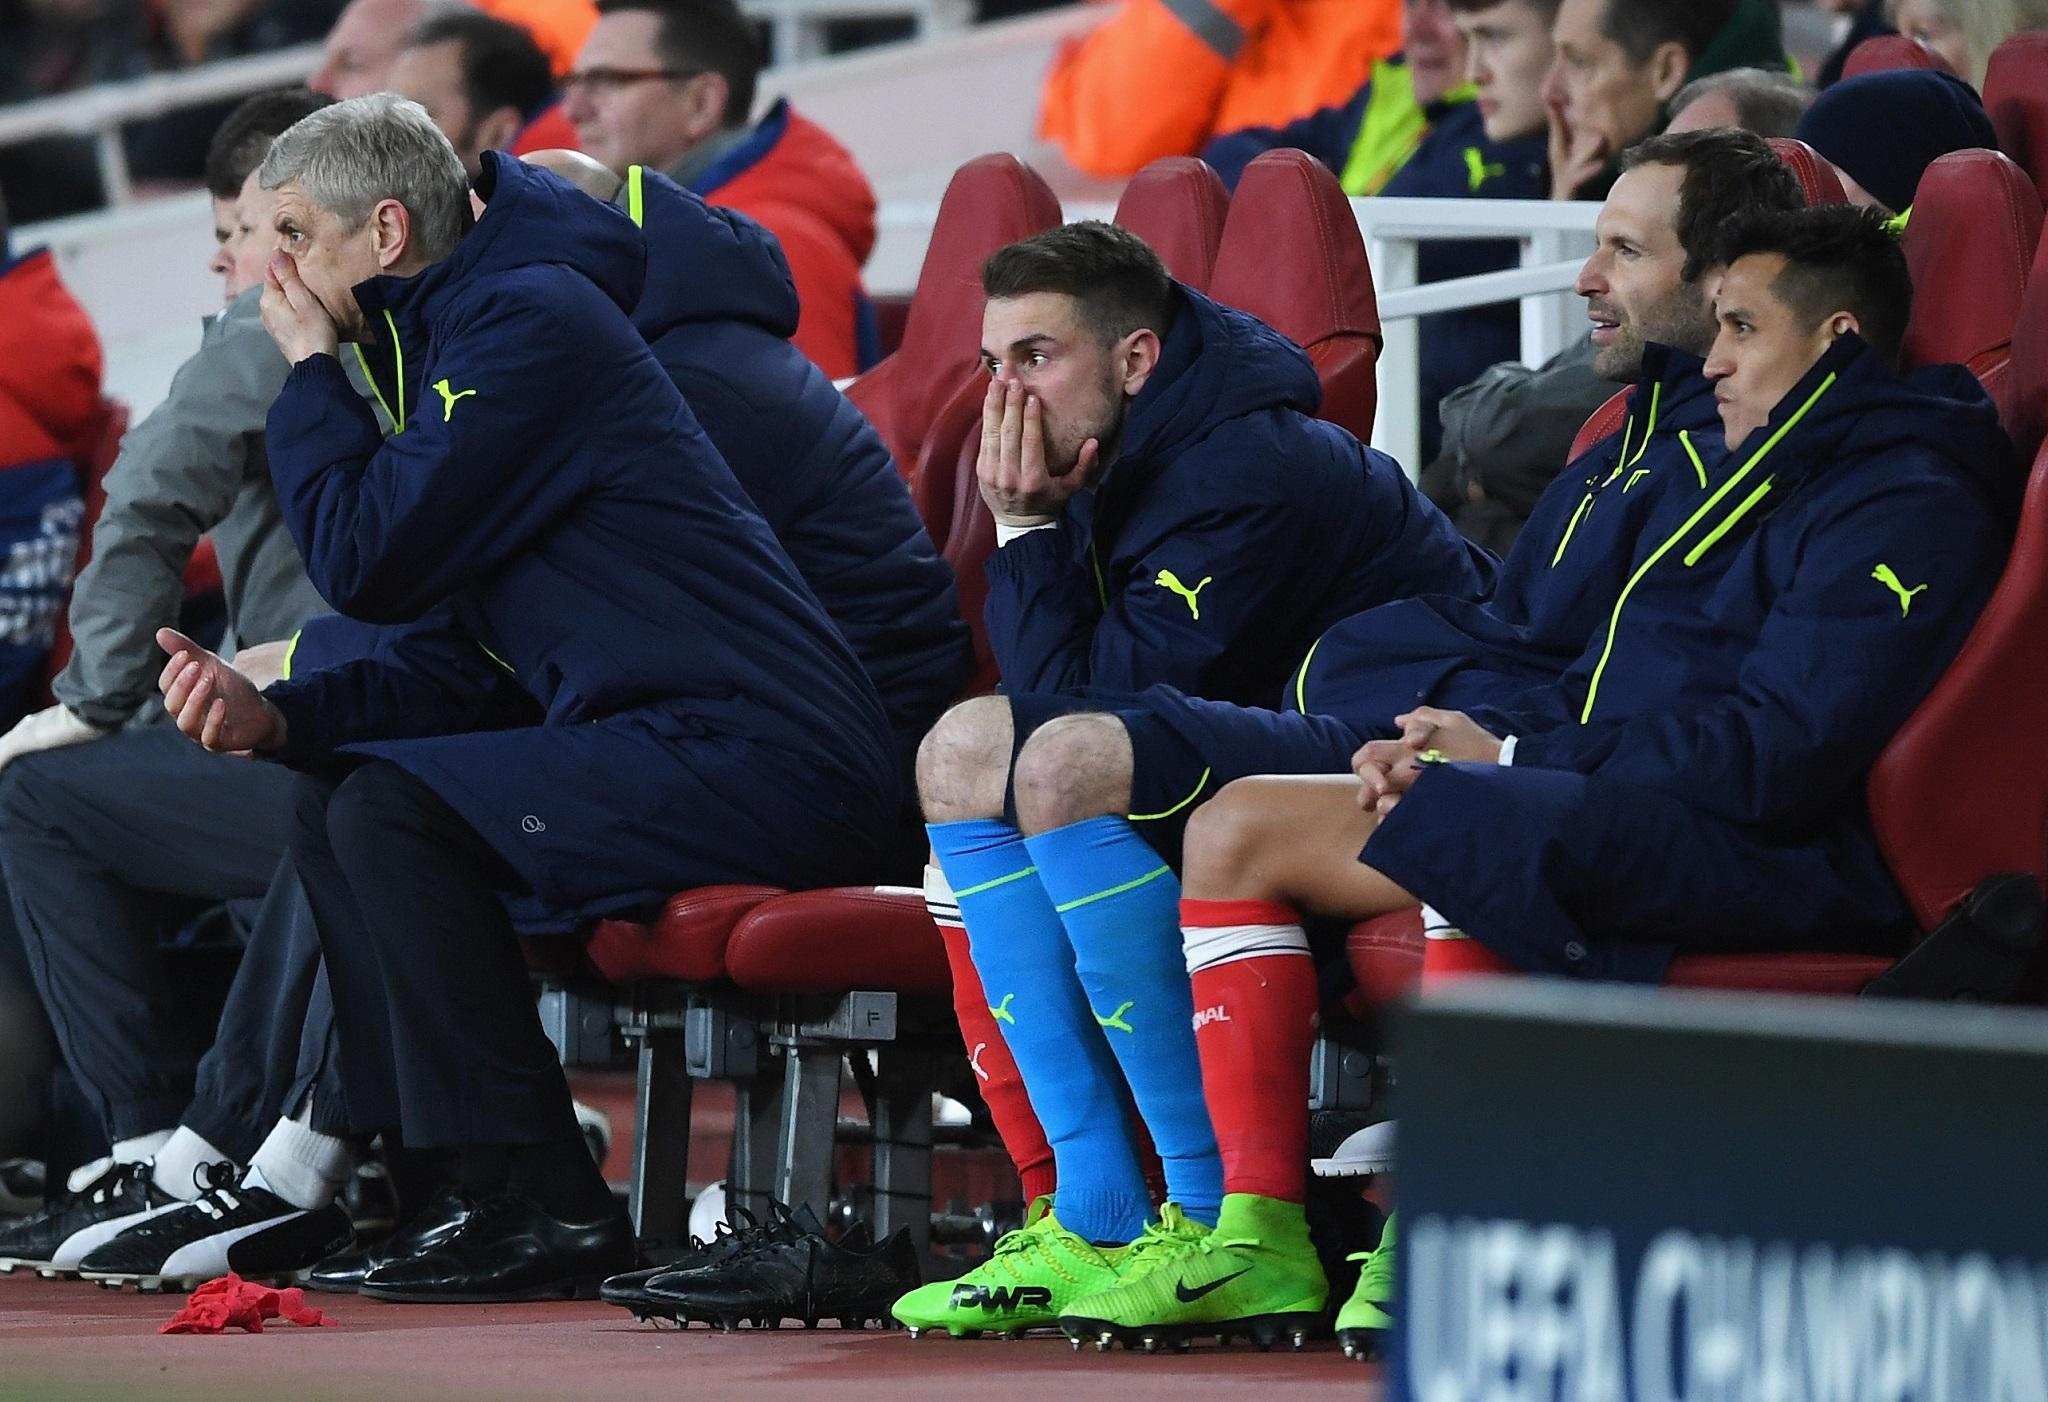 It was yet another chastening night for Wenger and his team